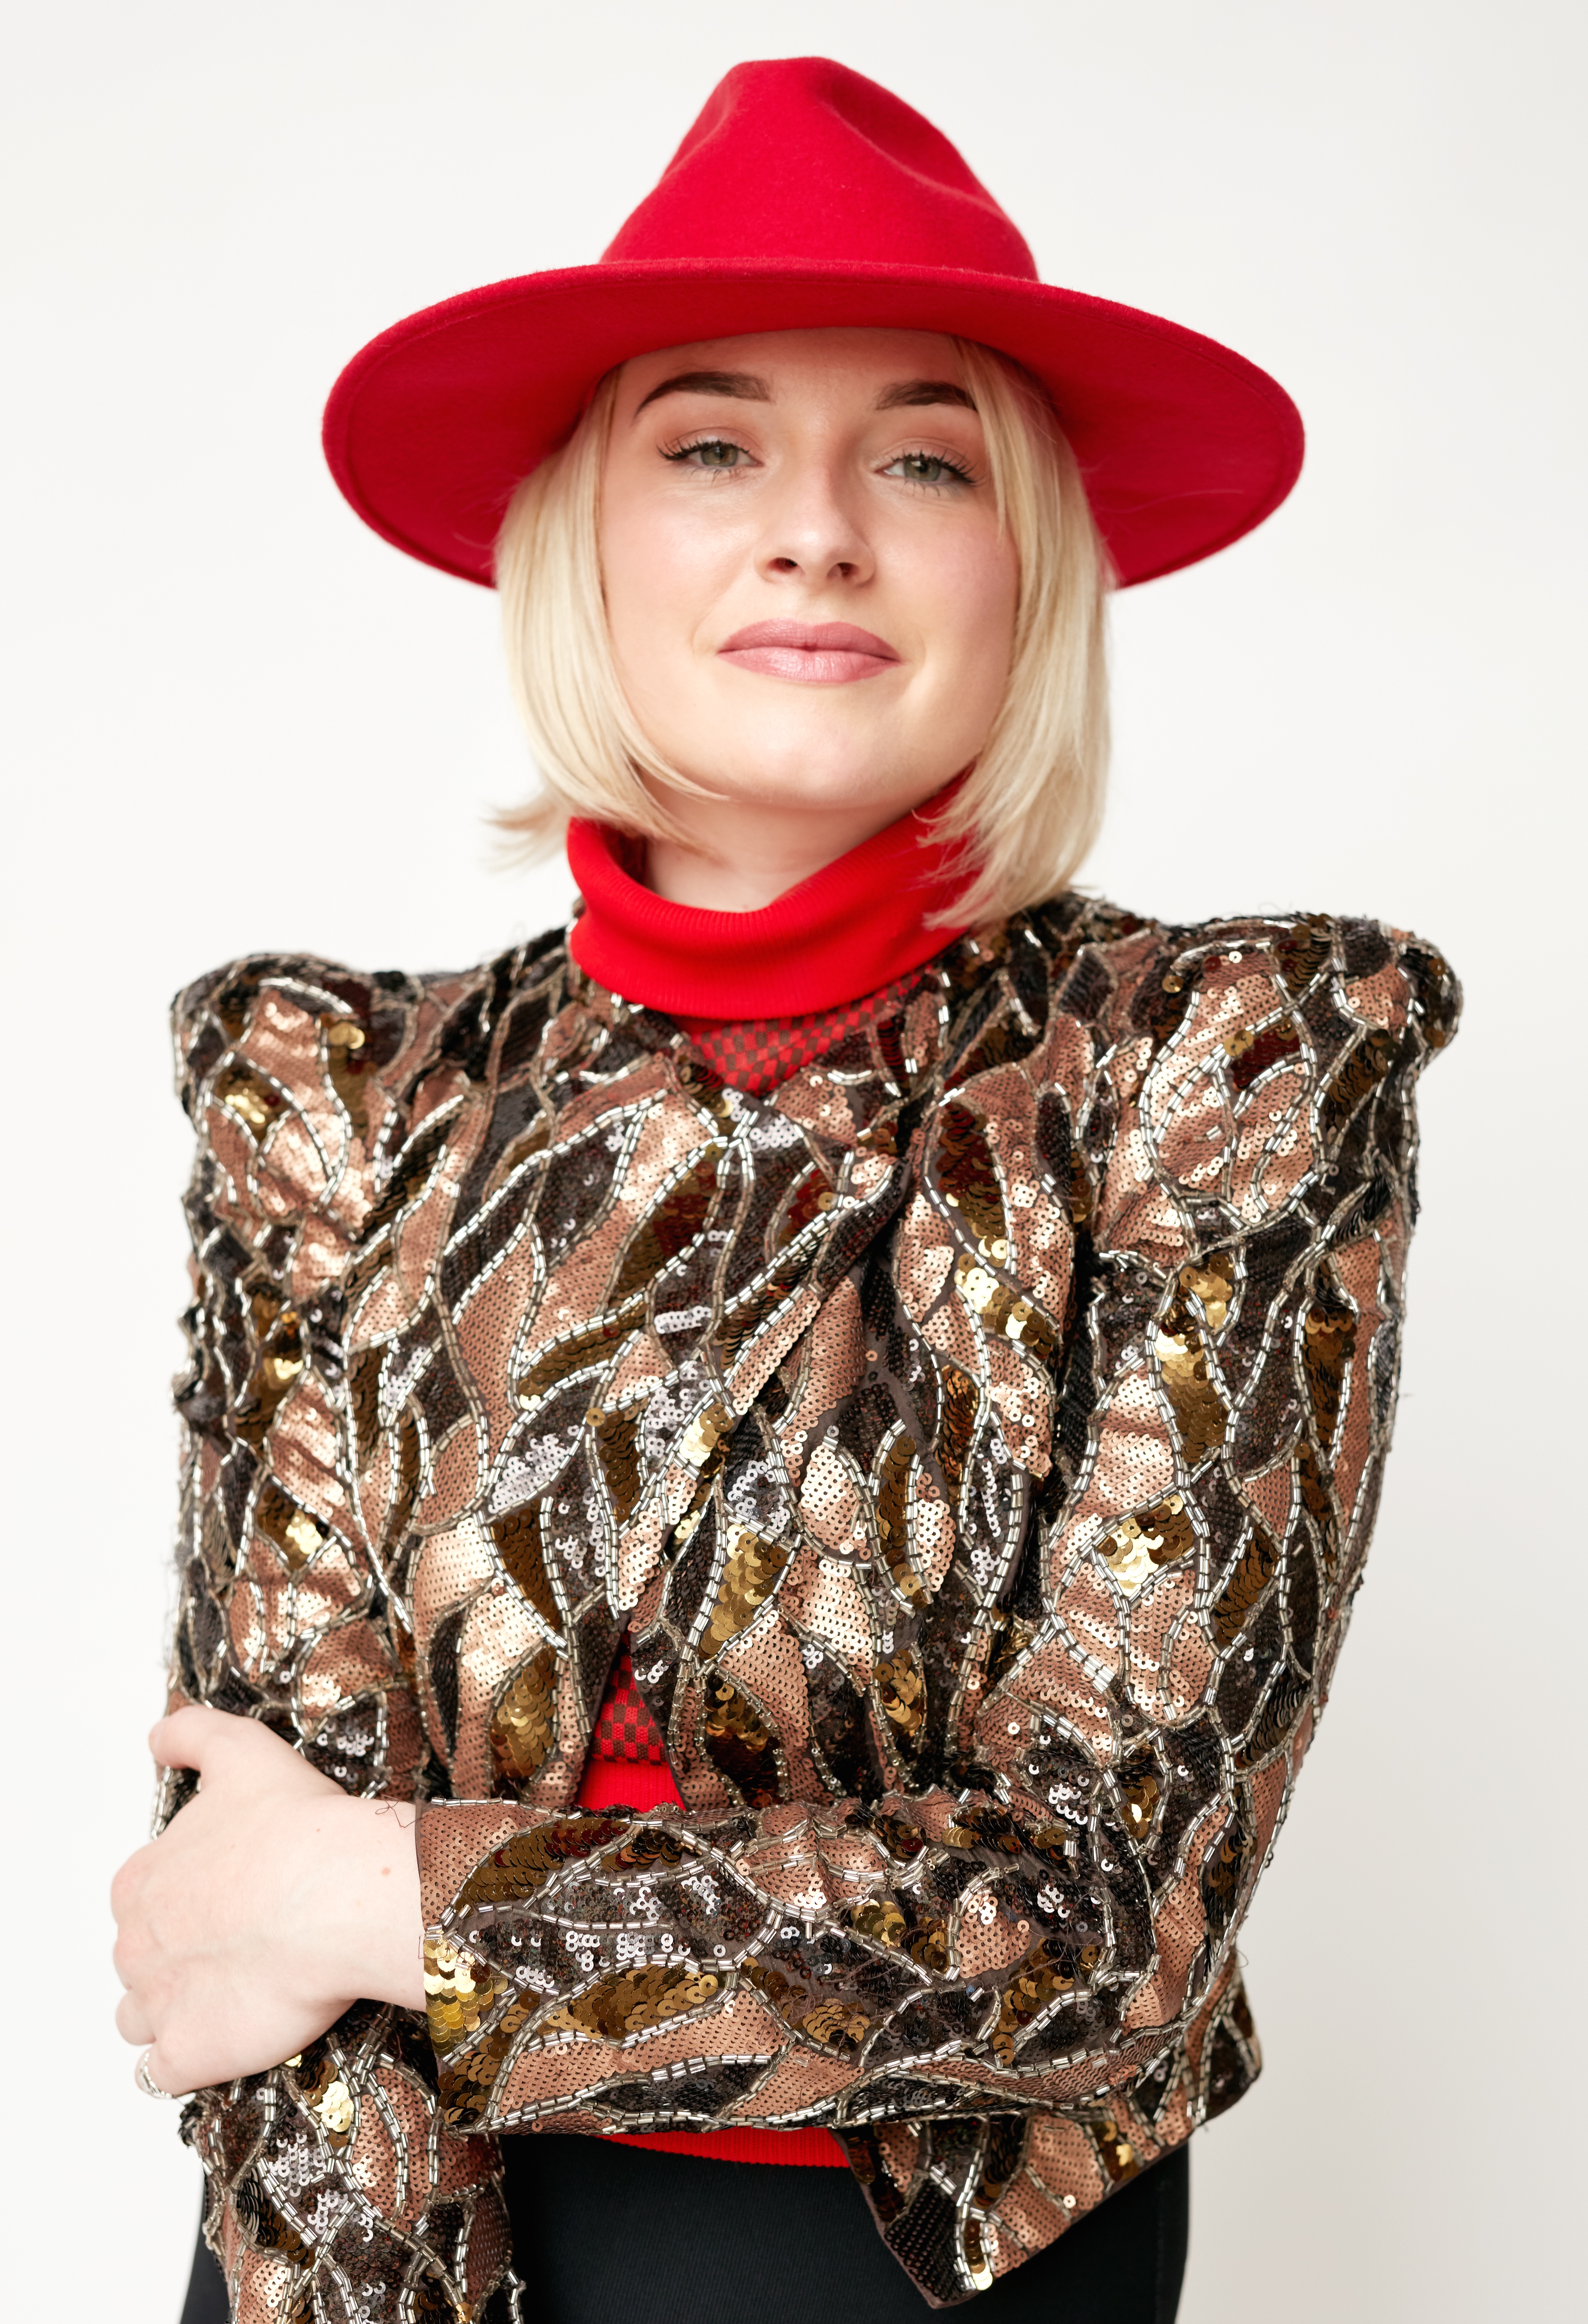 My Day on a Plate- Milliner Margaret O'Connor